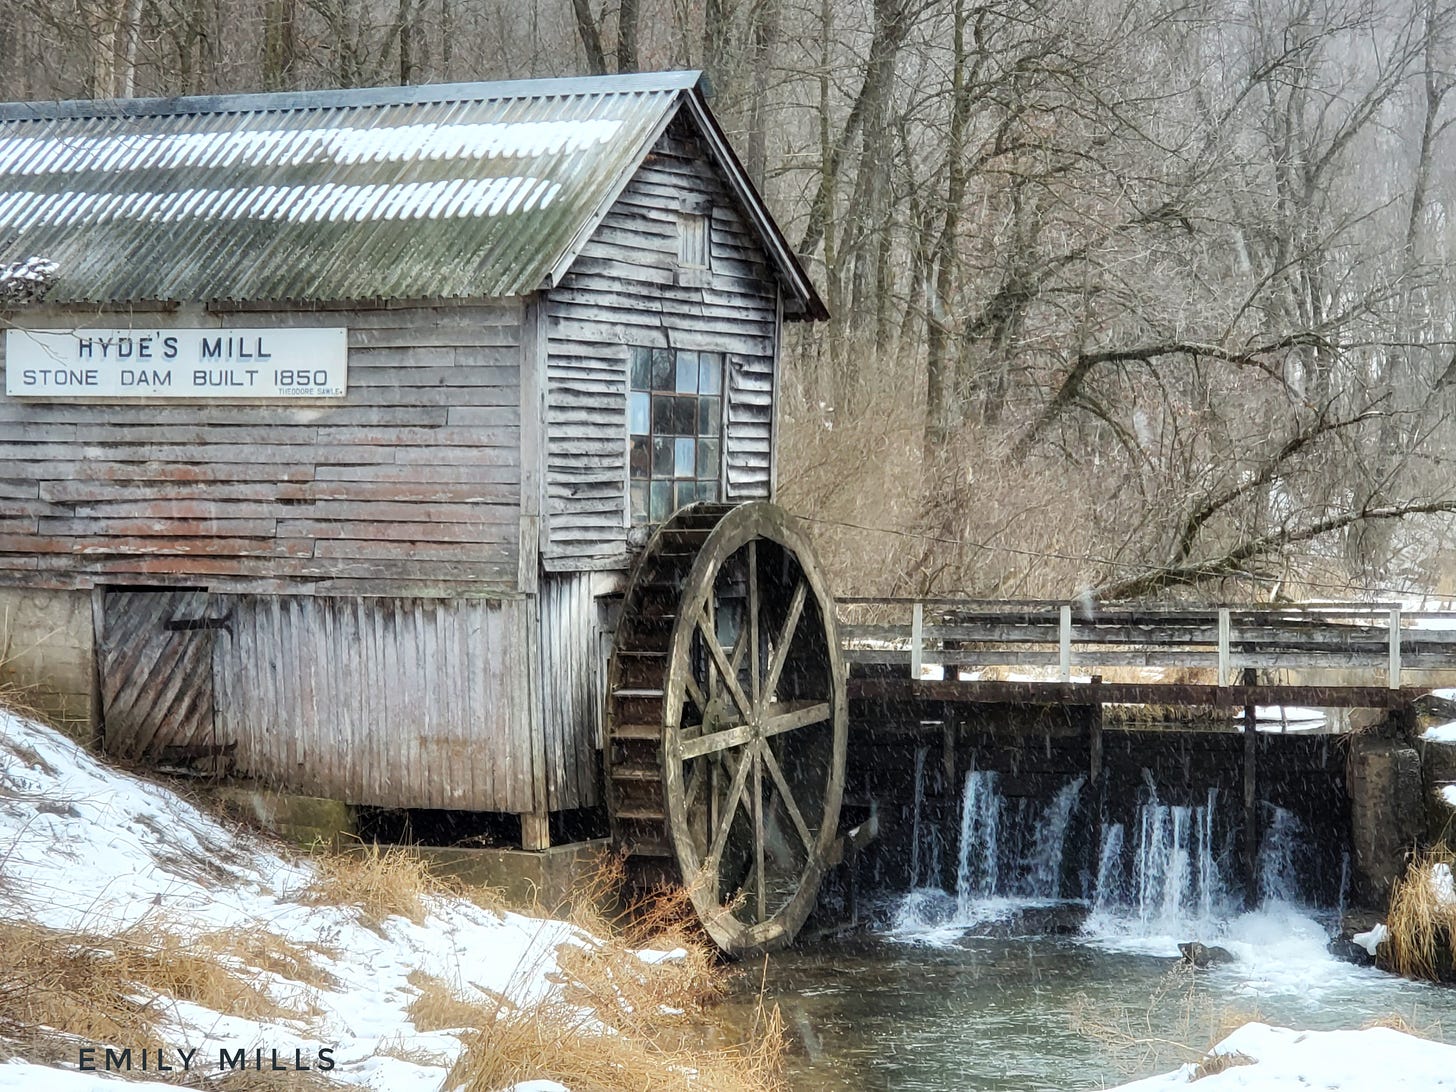 An old wooden building with a waterwheel borders a leaking stone dam and a low creek. Snow covers the brown grass on the shore below and snow can be seen falling in the air.